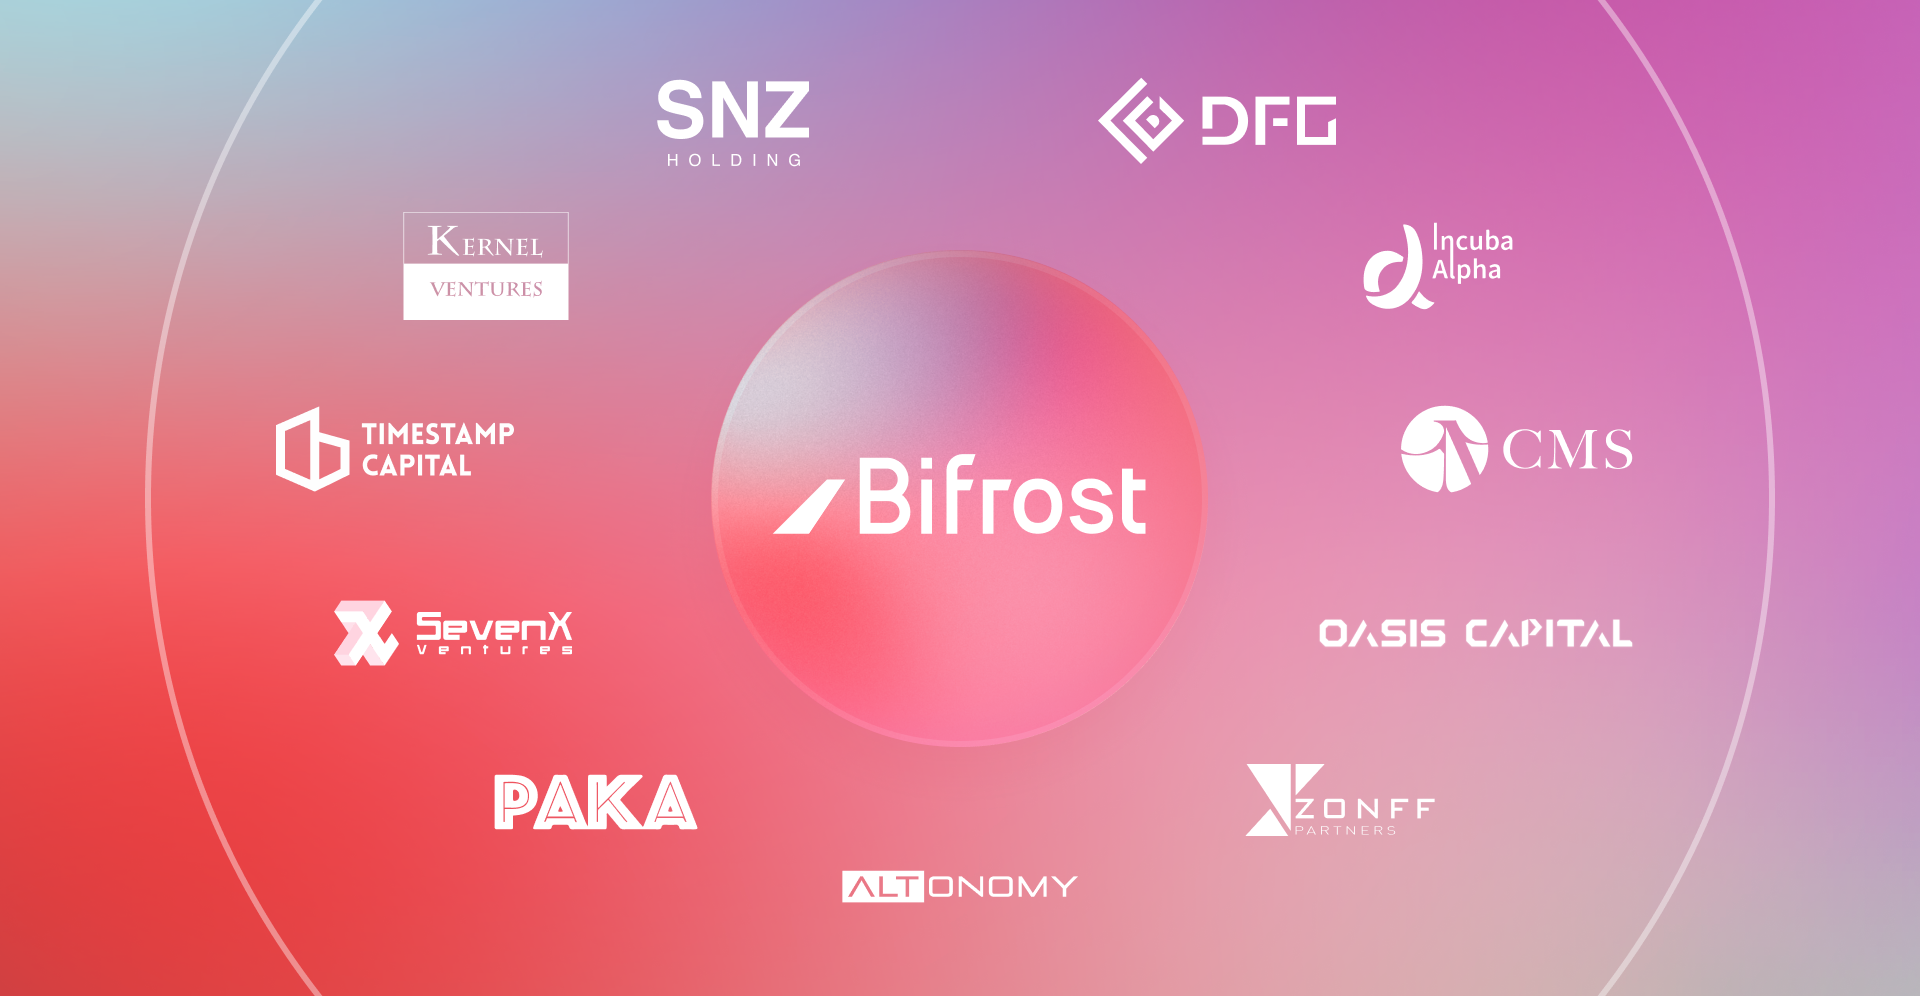 Bifrost has received a new round of angel funding from several leading institutions